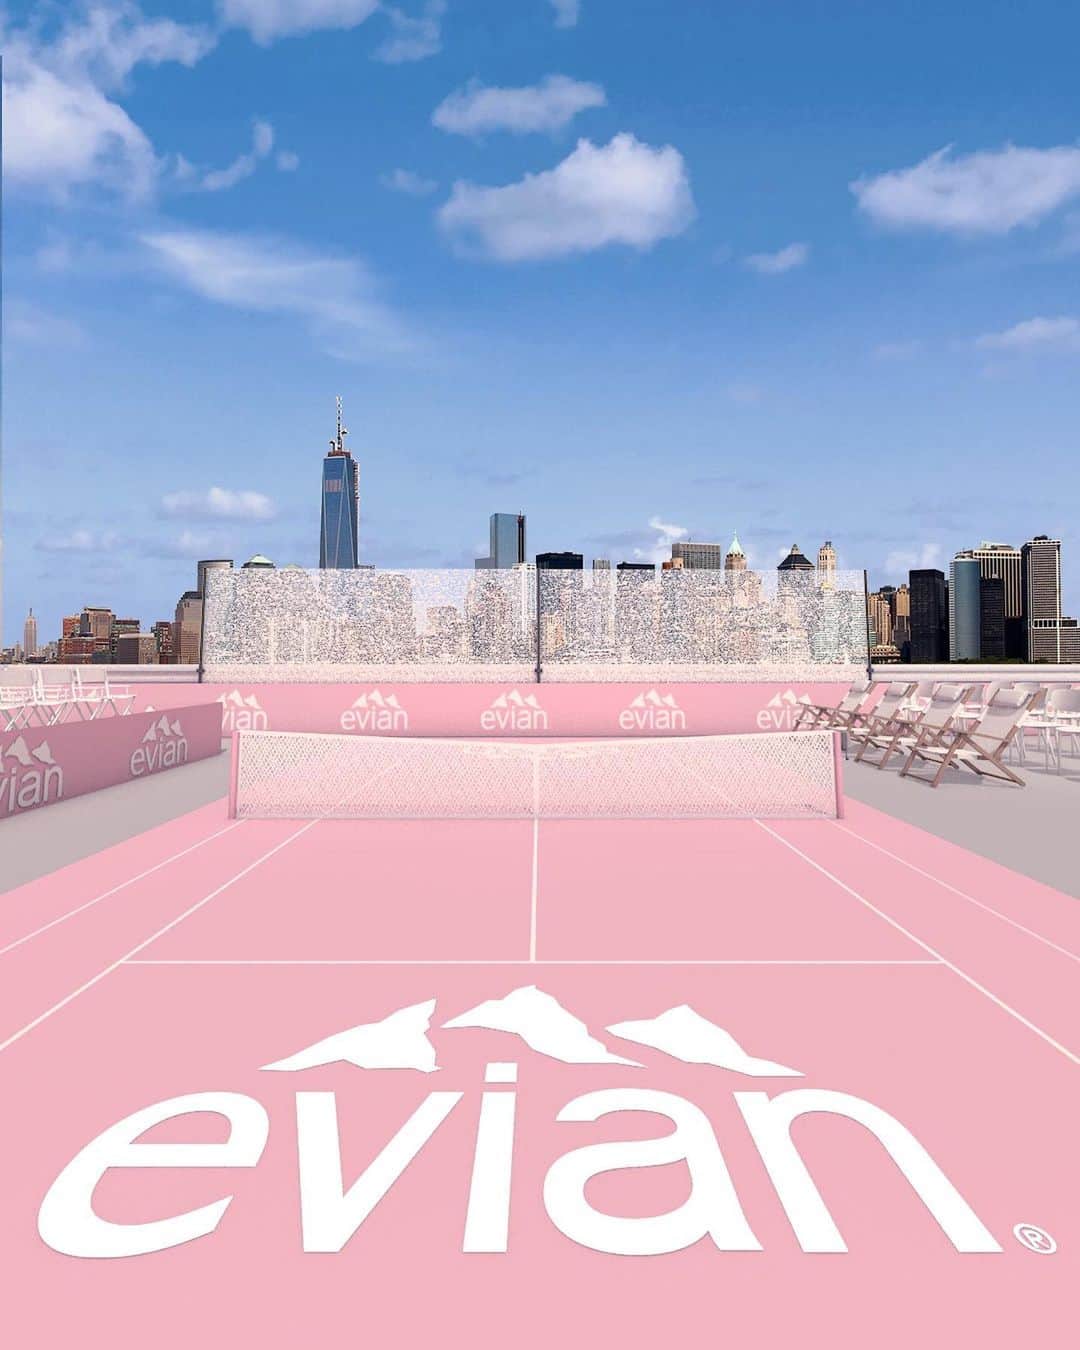 evianのインスタグラム：「Get ready to set sail on the SS evian! 🚢🎾 ​  Immerse yourself in a groundbreaking experience at the US Open Waterside Finals, brought to you by evian, the Official Water of the @usopen. ​  Captained by former US Open champion @mariasharapova, the SS evian invites you to watch the Men’s Final match on New York City's first floating tennis court on Sunday, 09/10. ​  Navigating the Hudson River aboard the iconic Circle Line, the SS evian celebrates the longstanding partnership between the US Open and evian, as we bring together our passion for tennis, the role hydration plays in elevating the game, and the spectacular view of Manhattan’s Skyline.🗽 ​  #evian #USOpen #tennis」